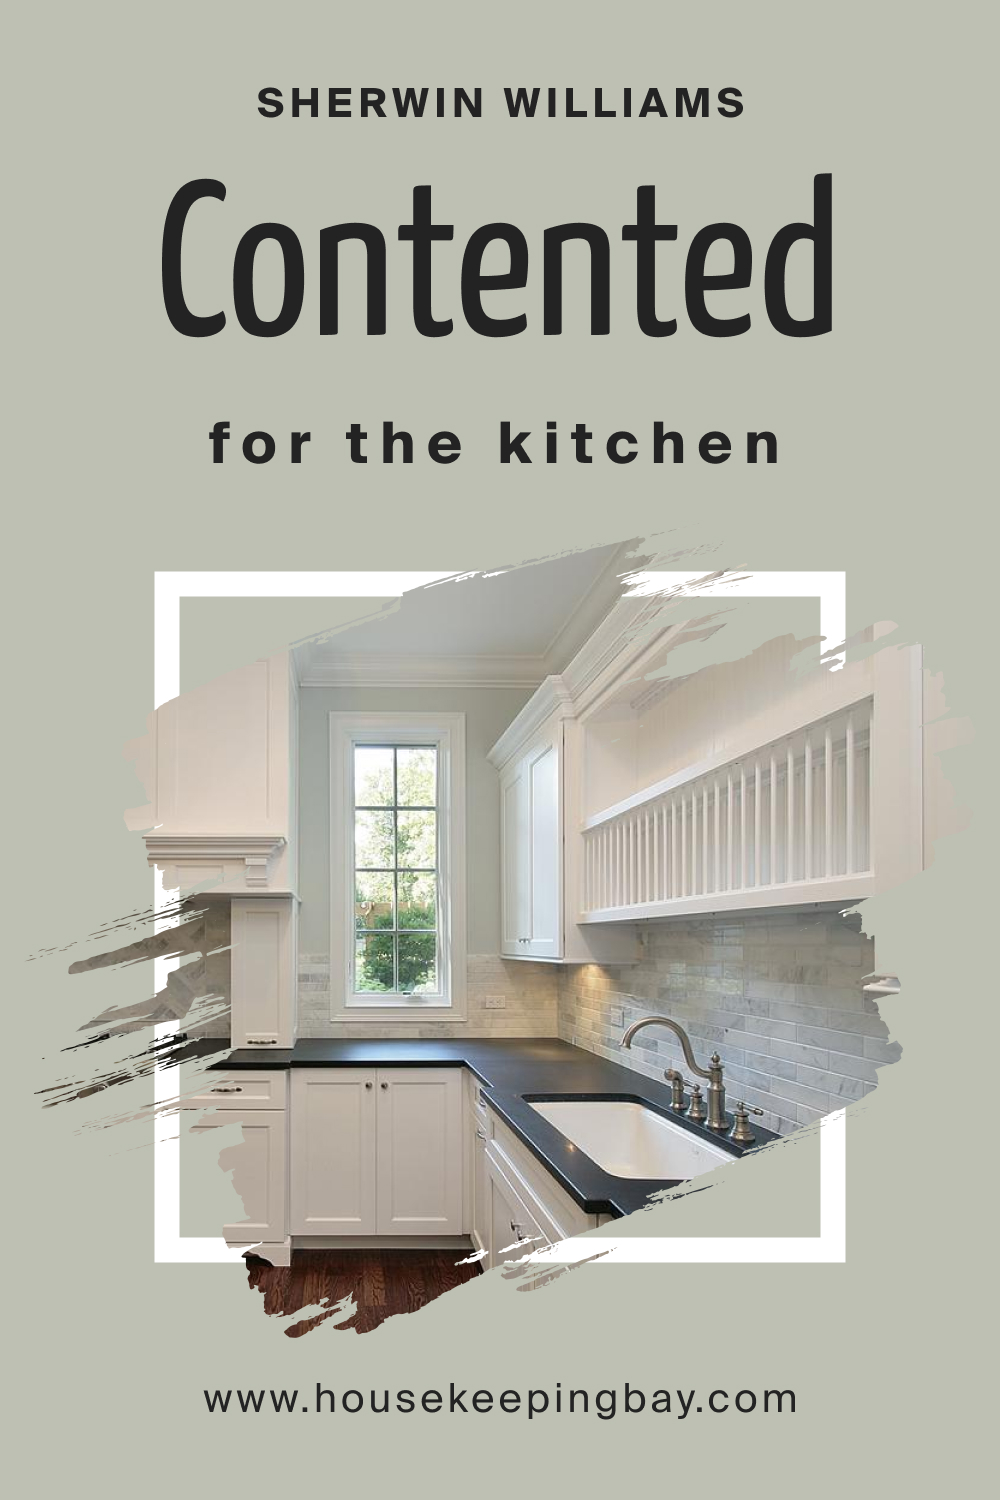 Sherwin Williams. SW 6191 Contented For the Kitchens